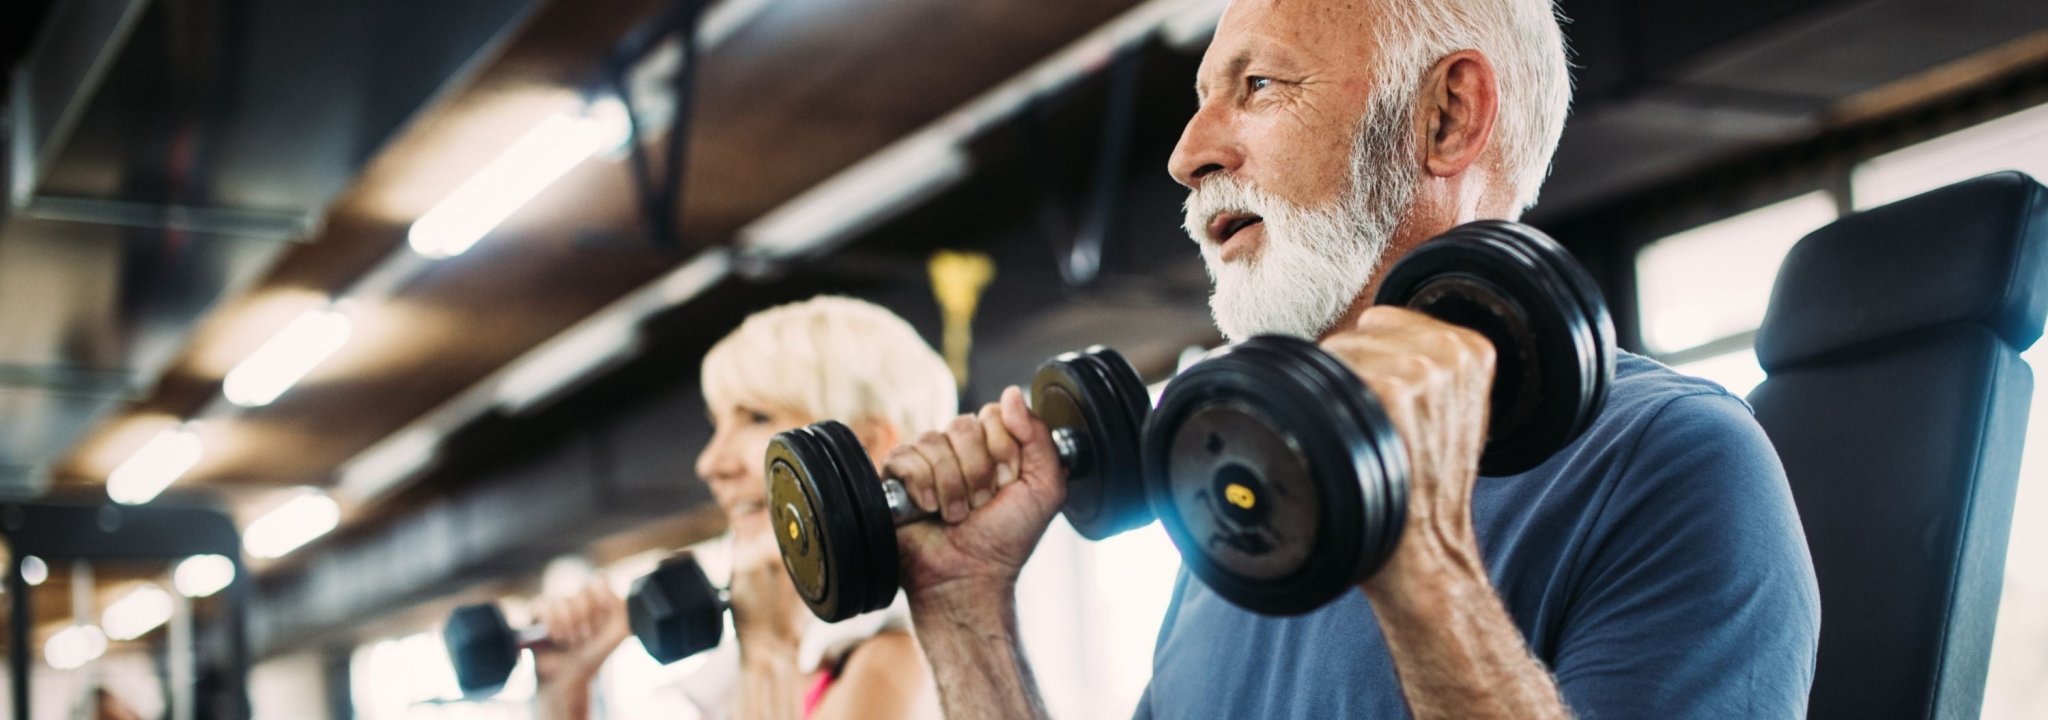 Whey Protein & Aging: Maintaining Muscle Mass as You Get Older - Ultimate Nutrition